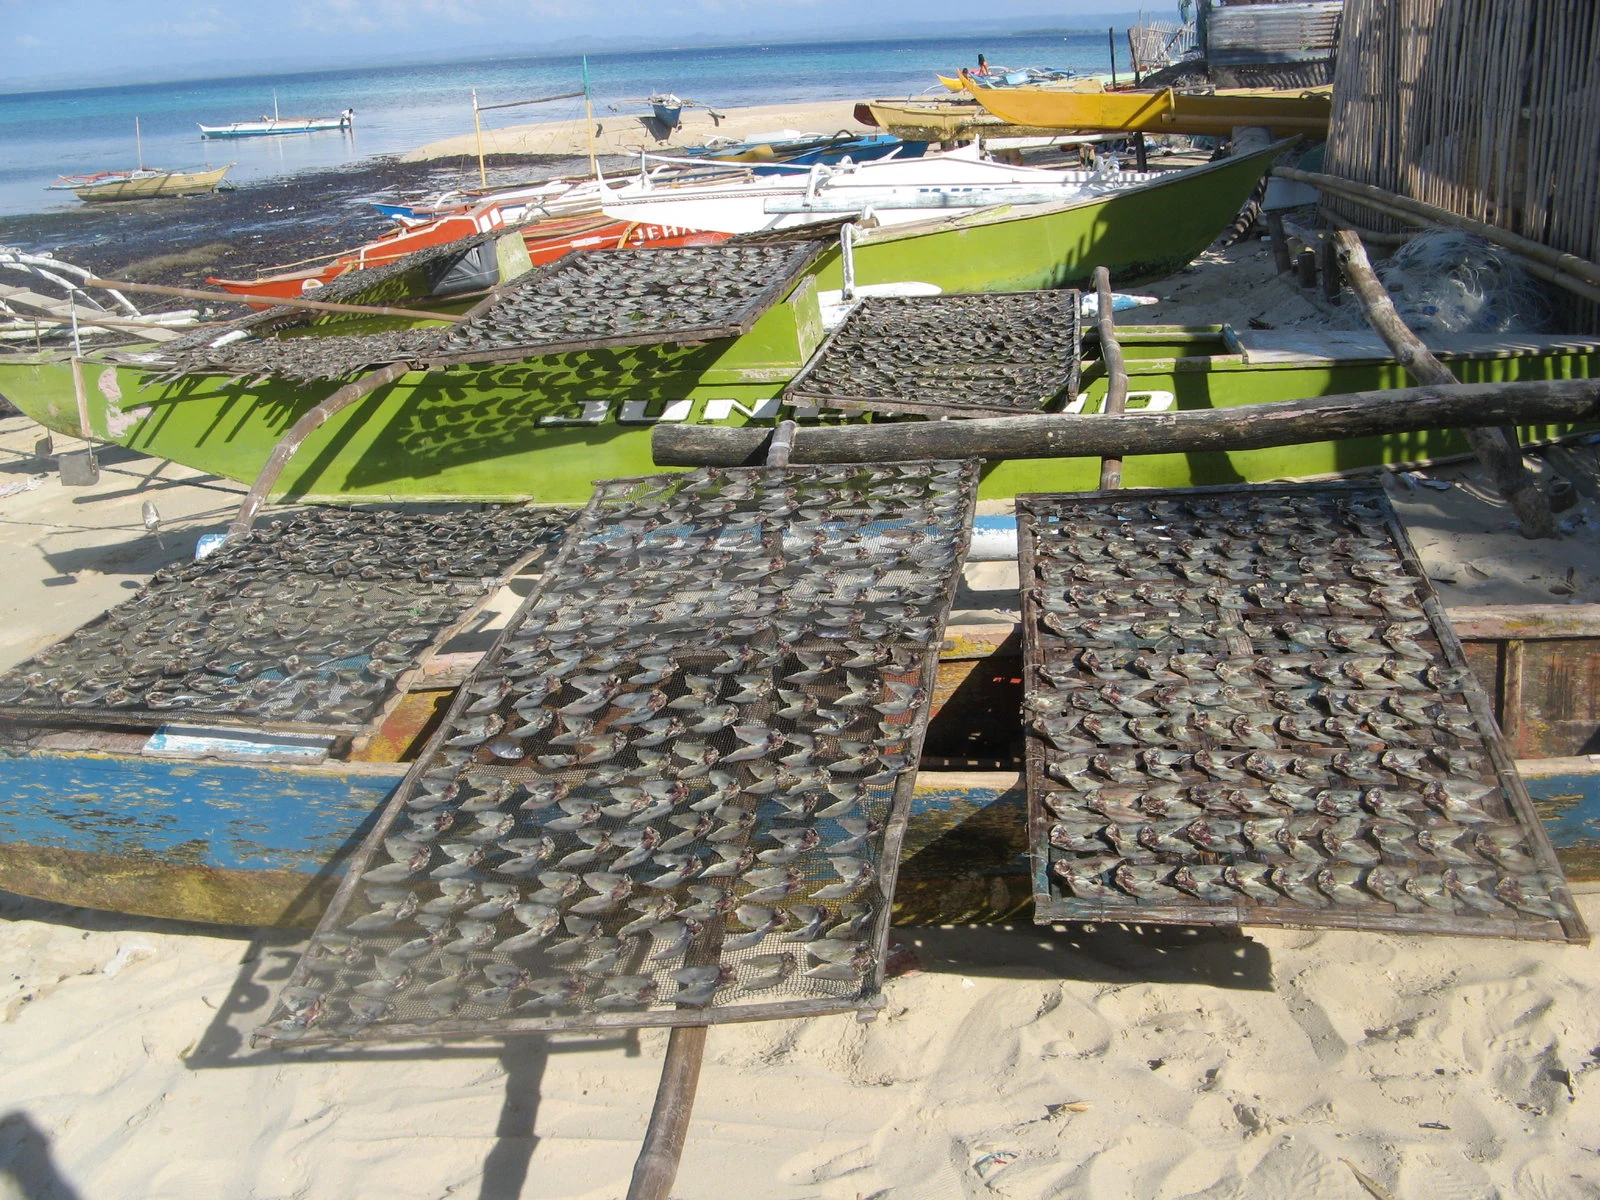 Fish tails are laid out to dry.